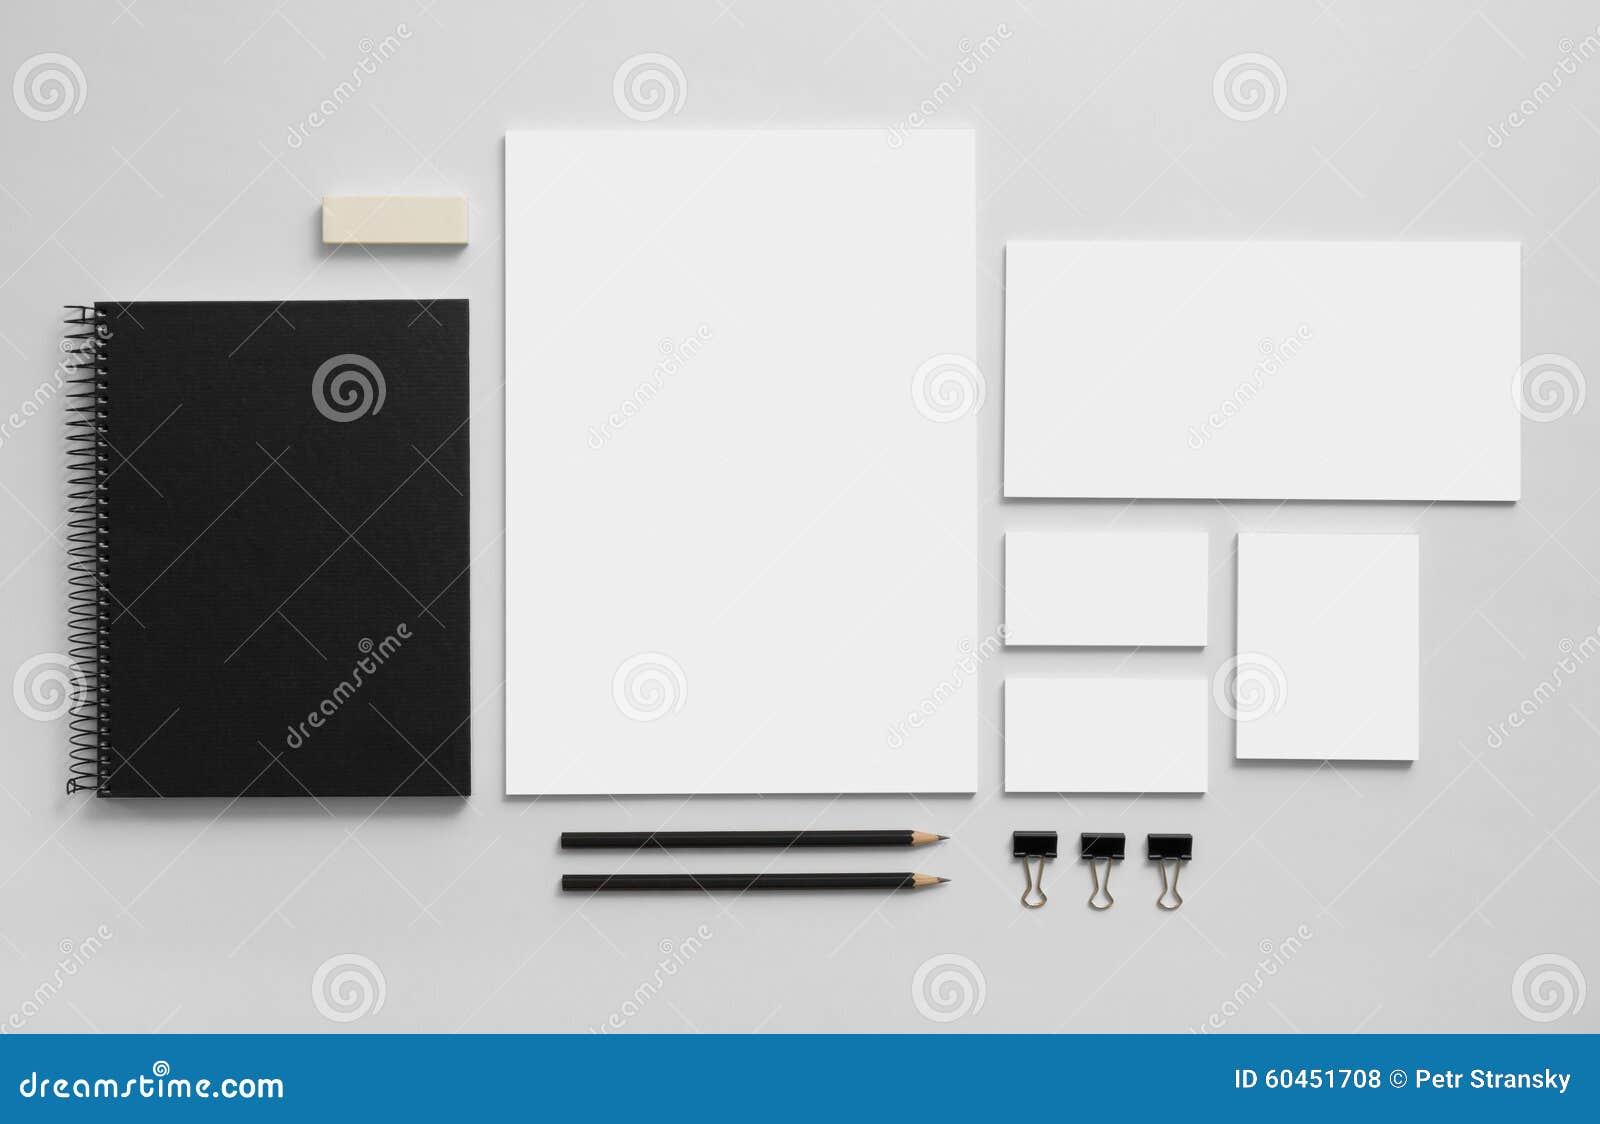 mockup business brand template on gray background